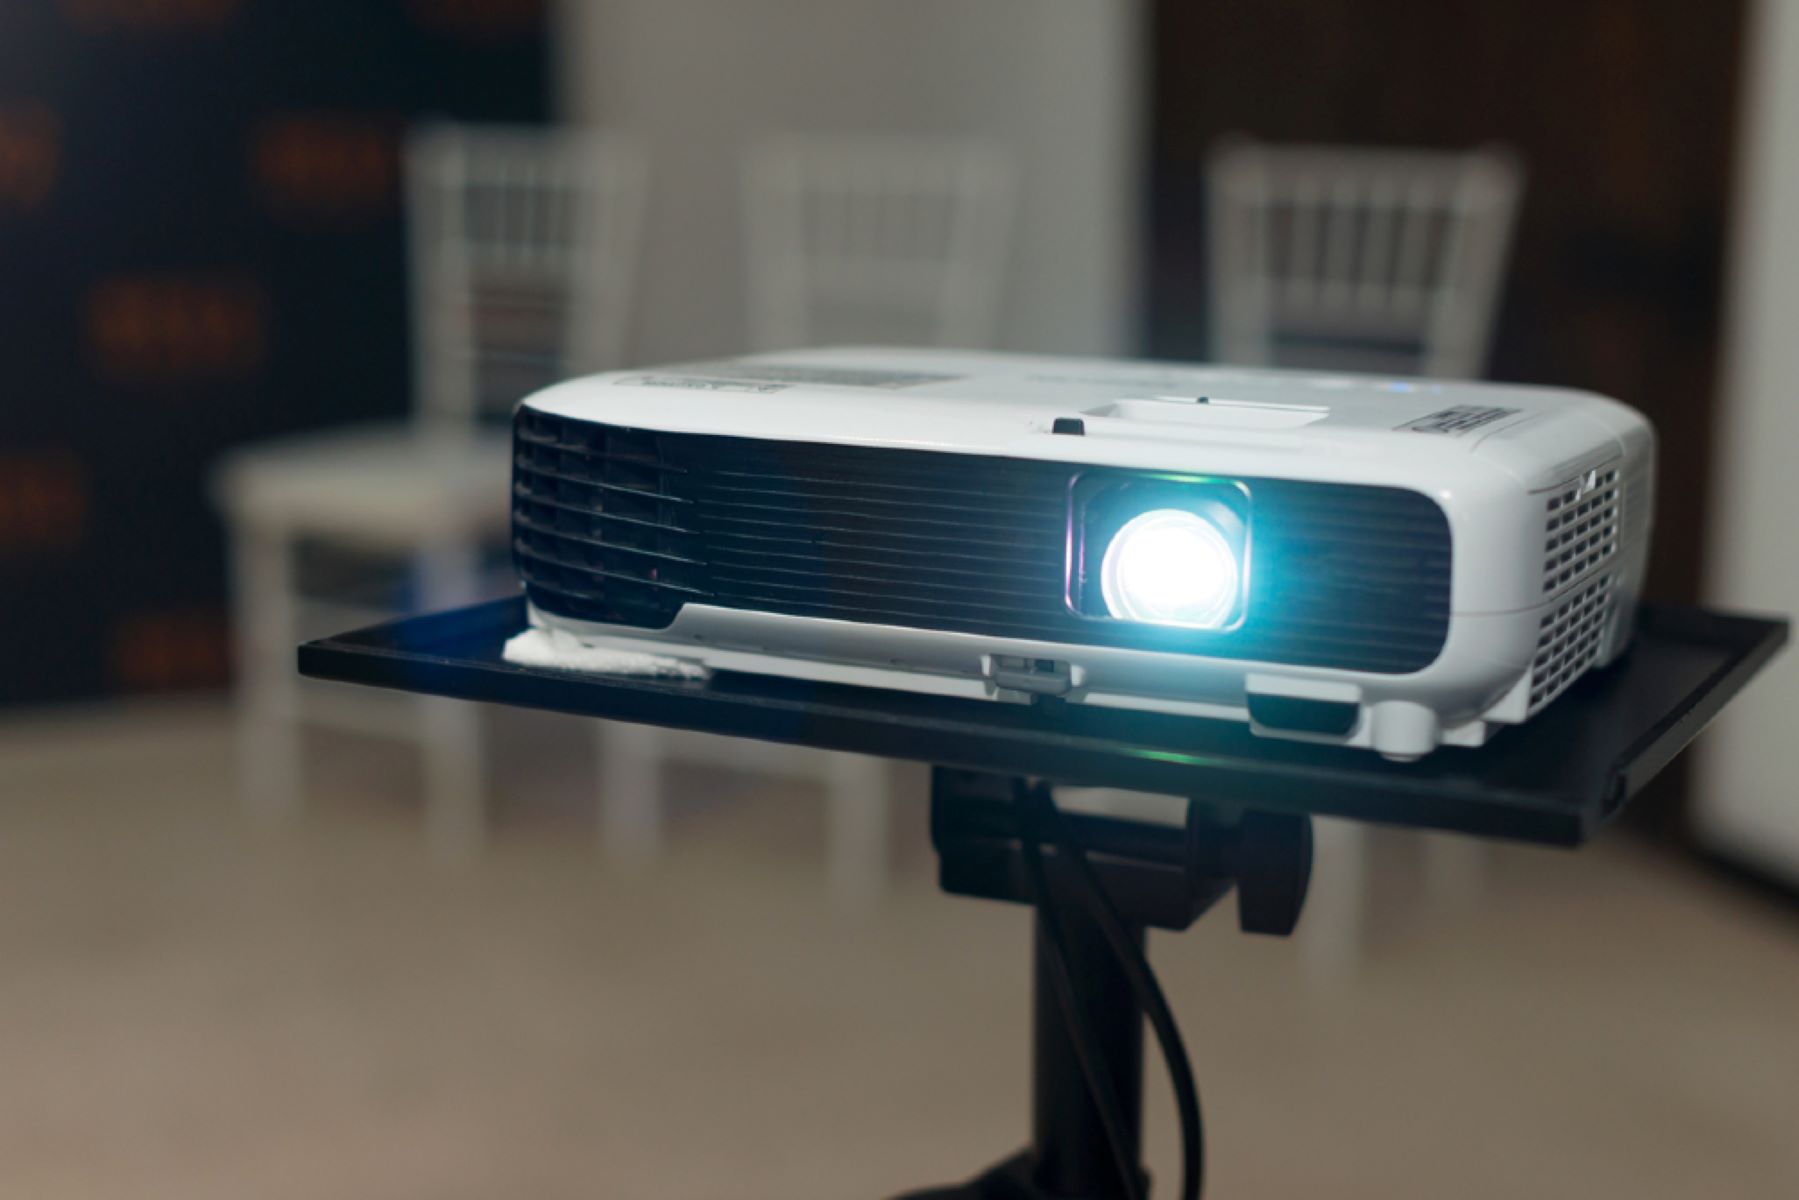 Controlling A Projector With Your Phone: A Quick Guide